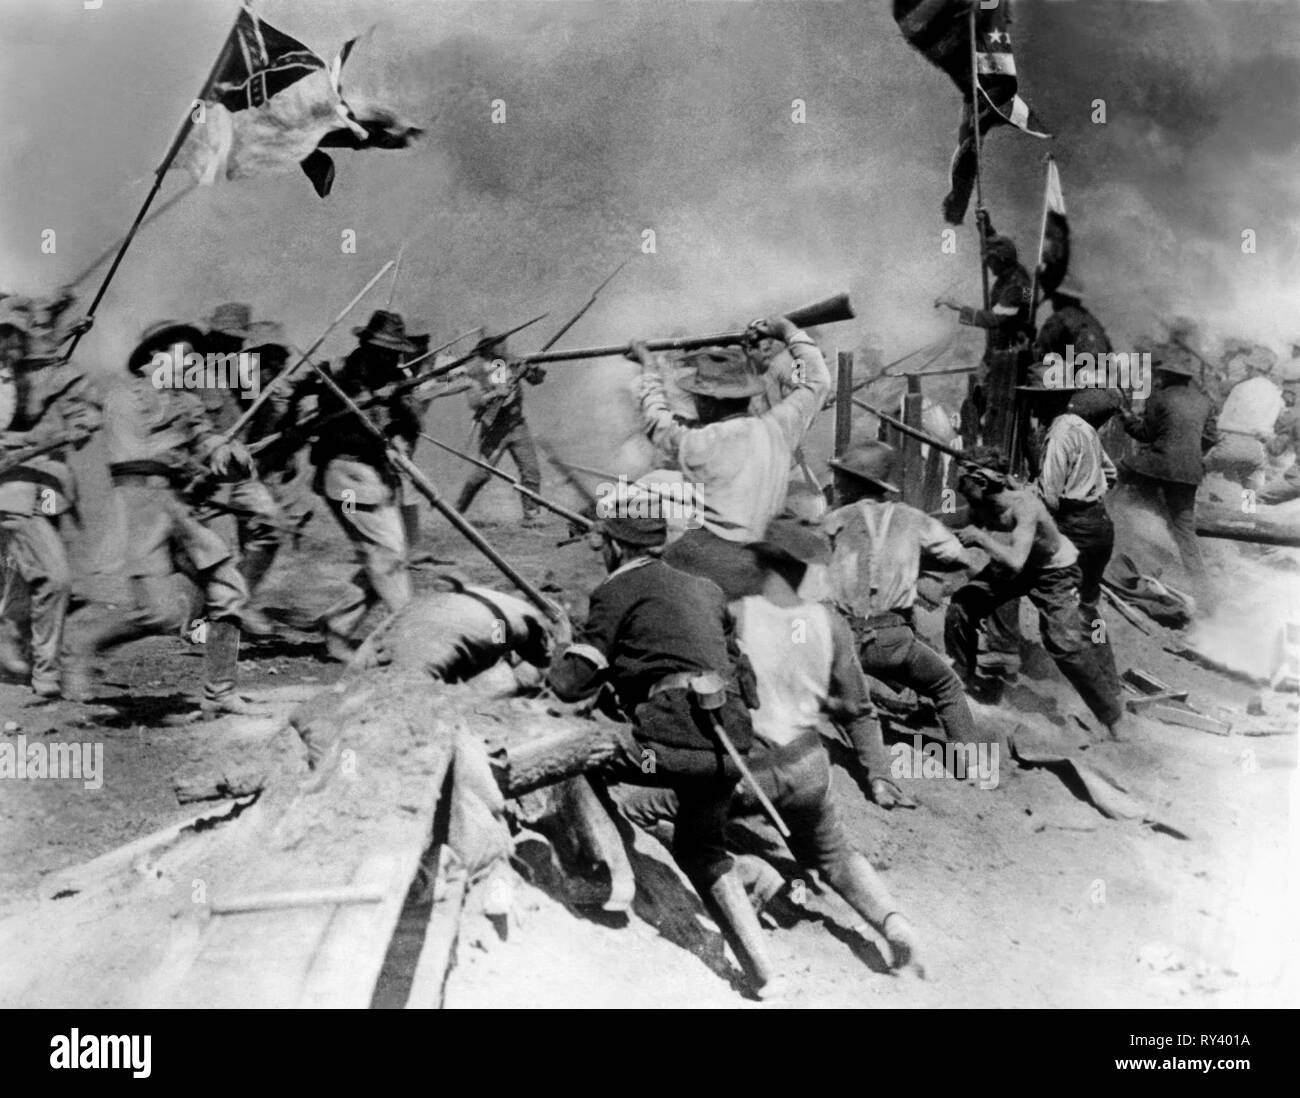 BATTLE SCENE, THE BIRTH OF A NATION, 1915